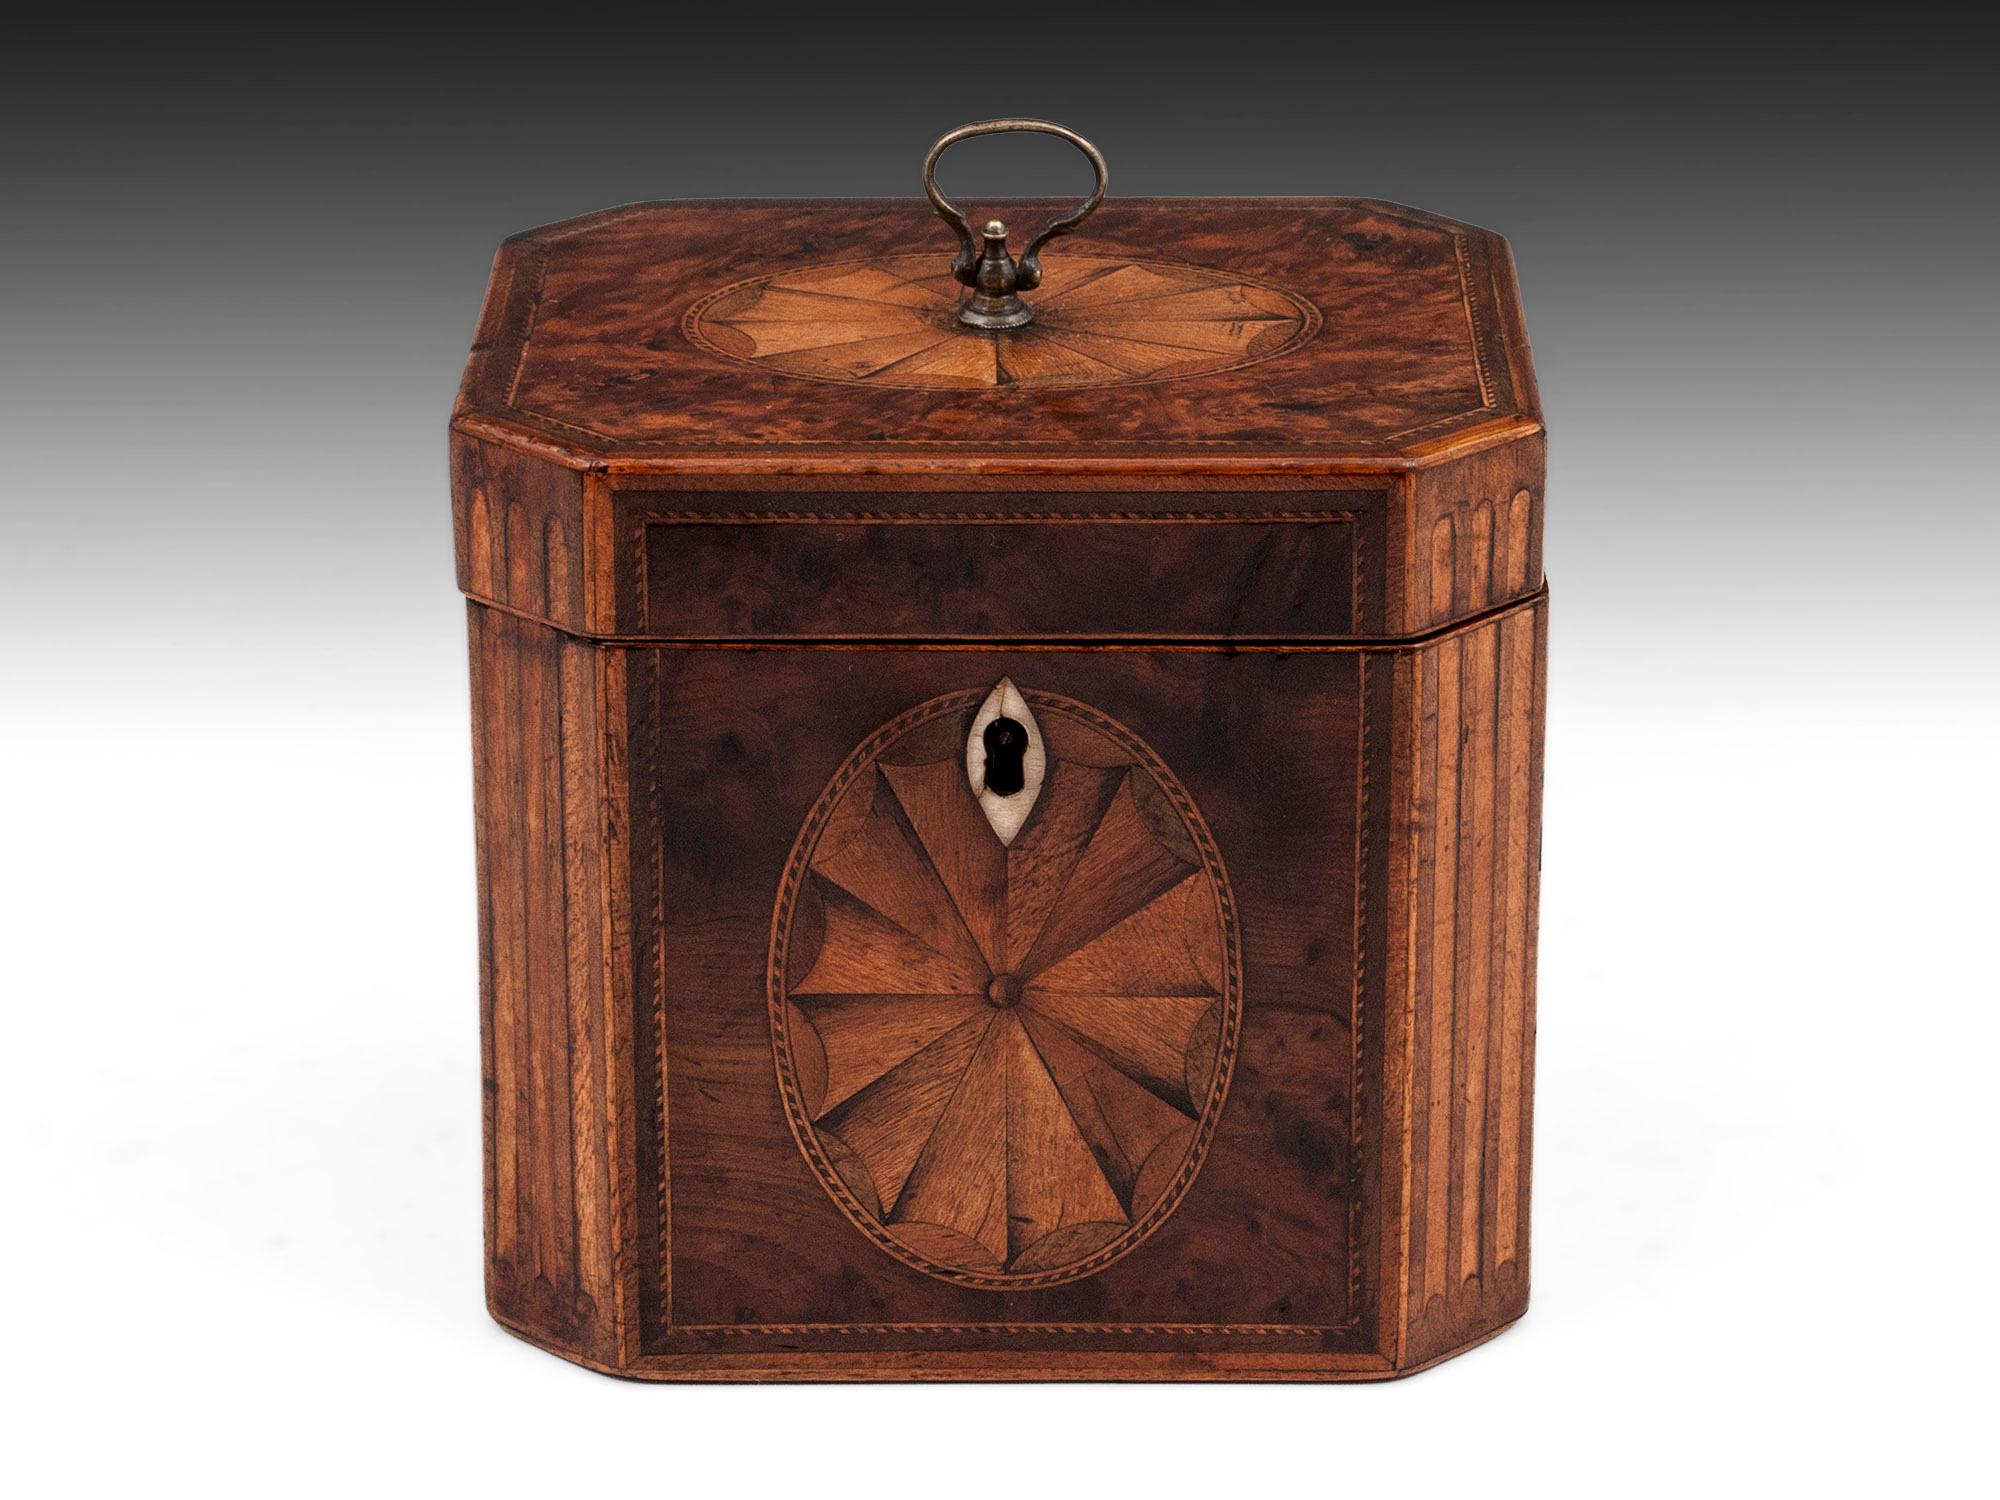 Burr Yew Inlaid Tea Caddy Circa 1780

From our Tea Caddies collection, we are thrilled to offer this square Georgian Burr Yew wood inlaid Tea Caddy. The Caddy of square form with canted corners having inlaid boxwood flutes. The front and lid